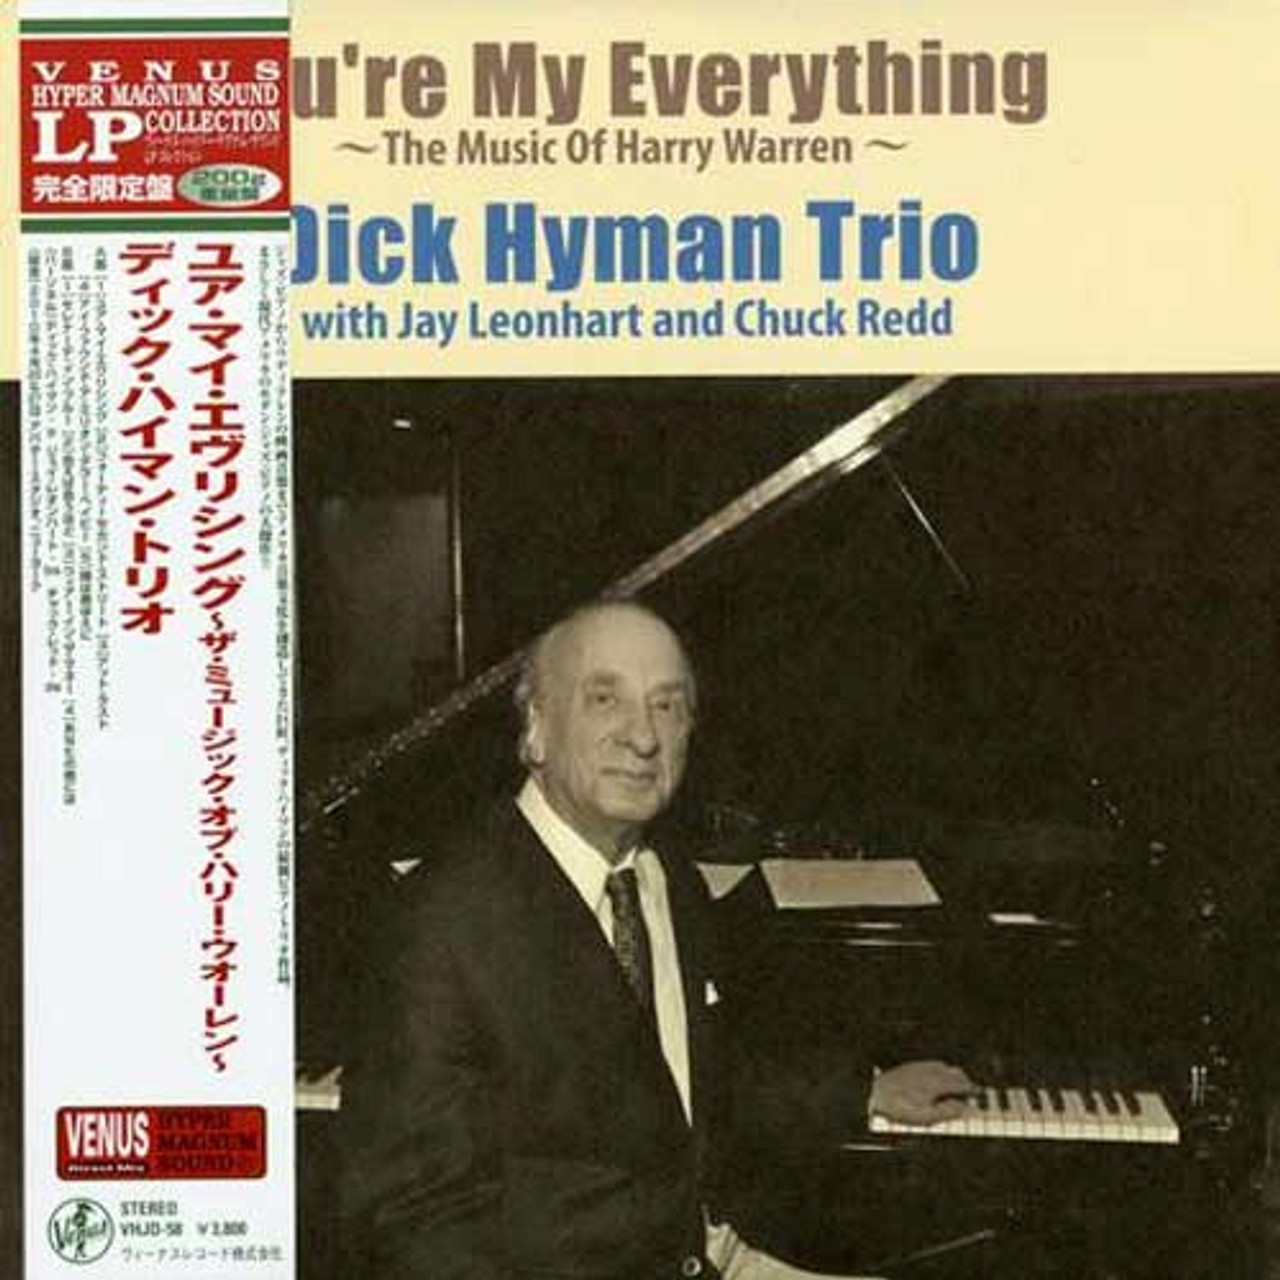 Dick　200g　Everything　My　Hyman　You're　Trio　The　LP